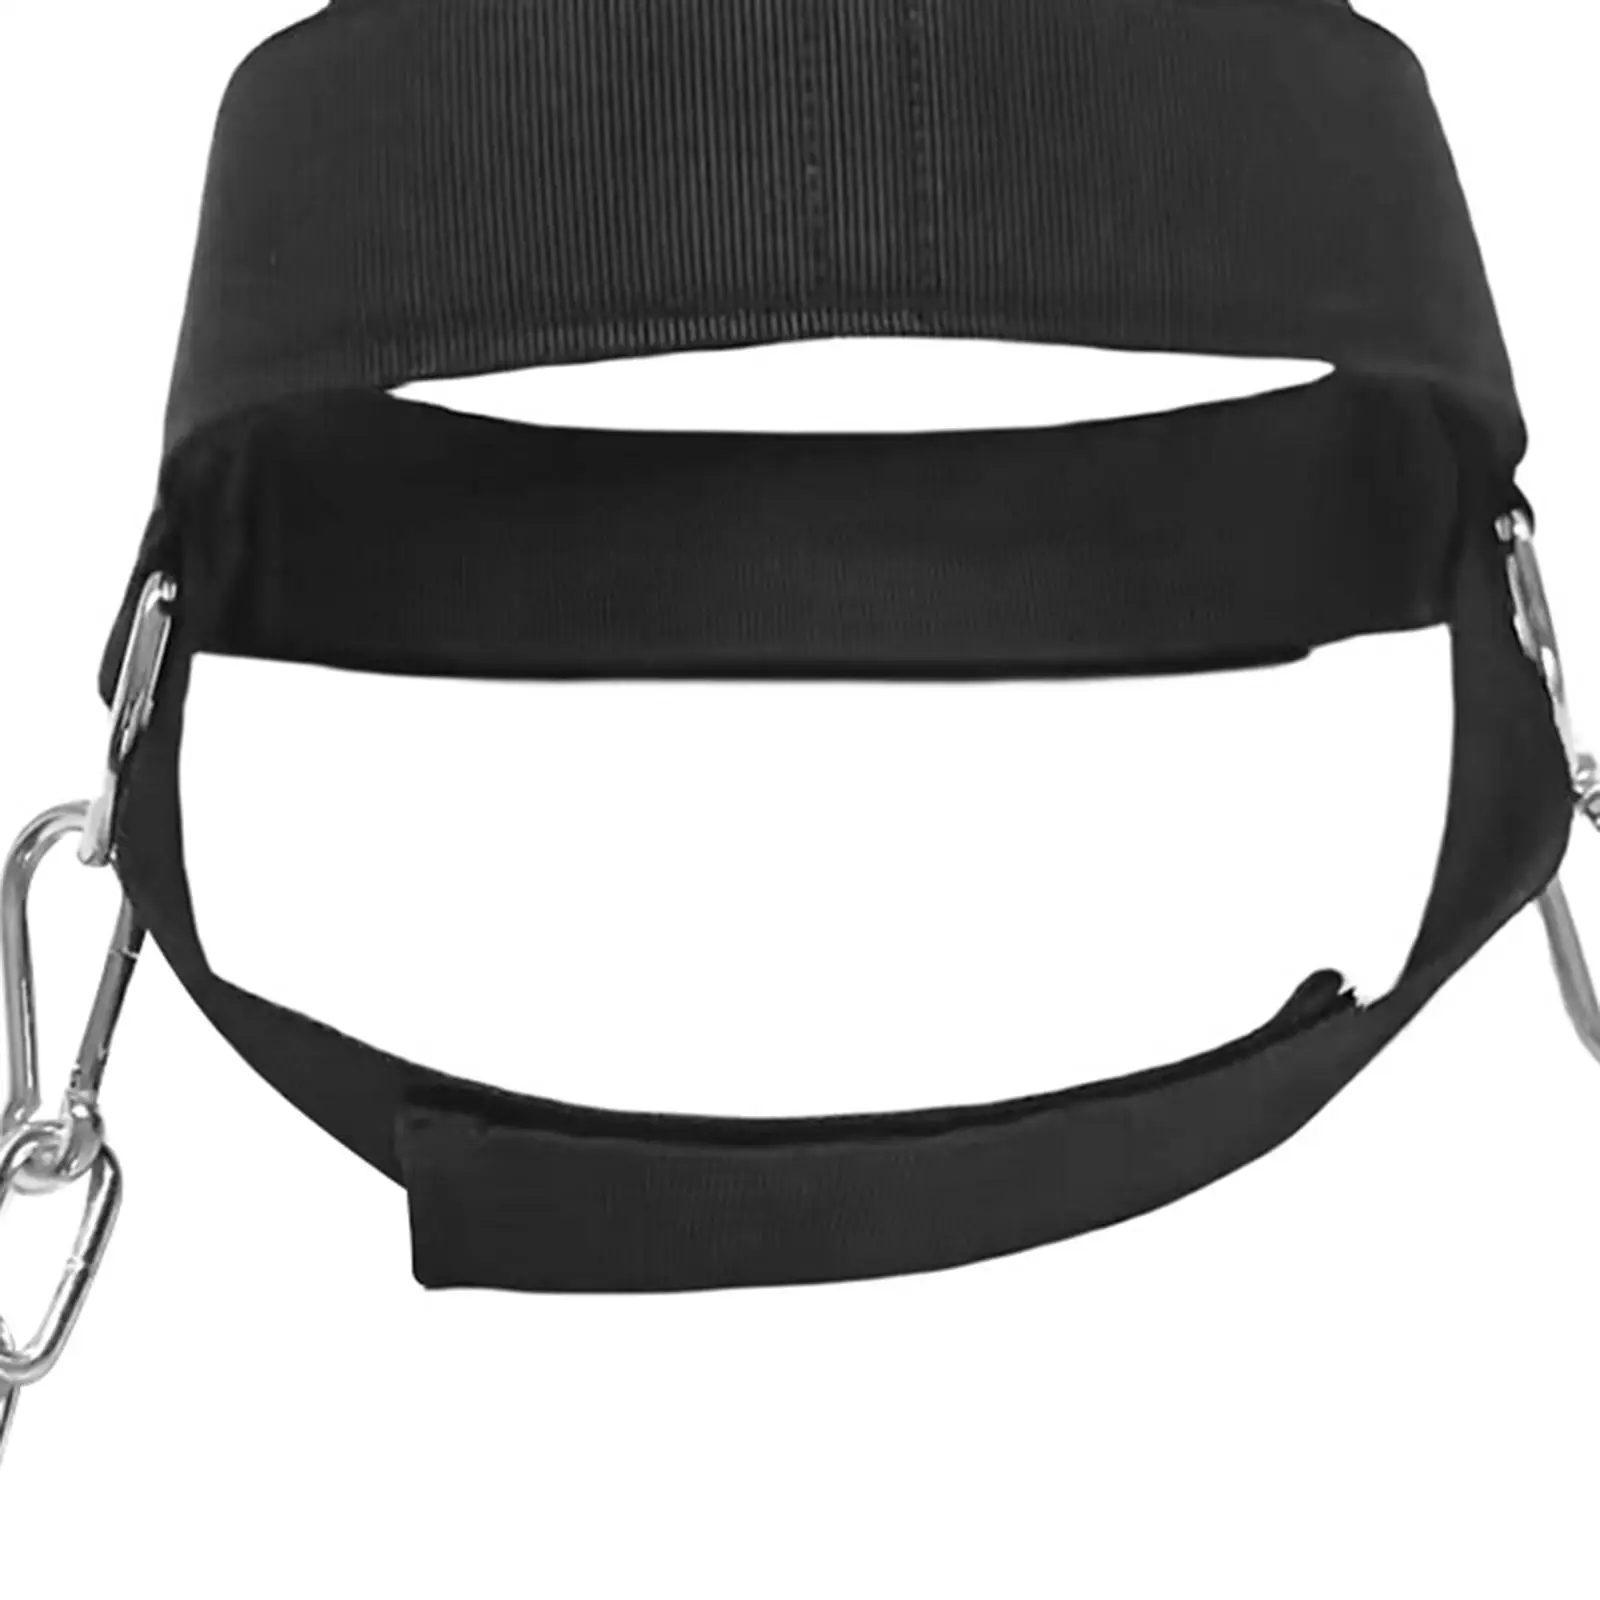 Head Neck Harness Head Neck Trainer for Equipment Weight Lifting Exercise